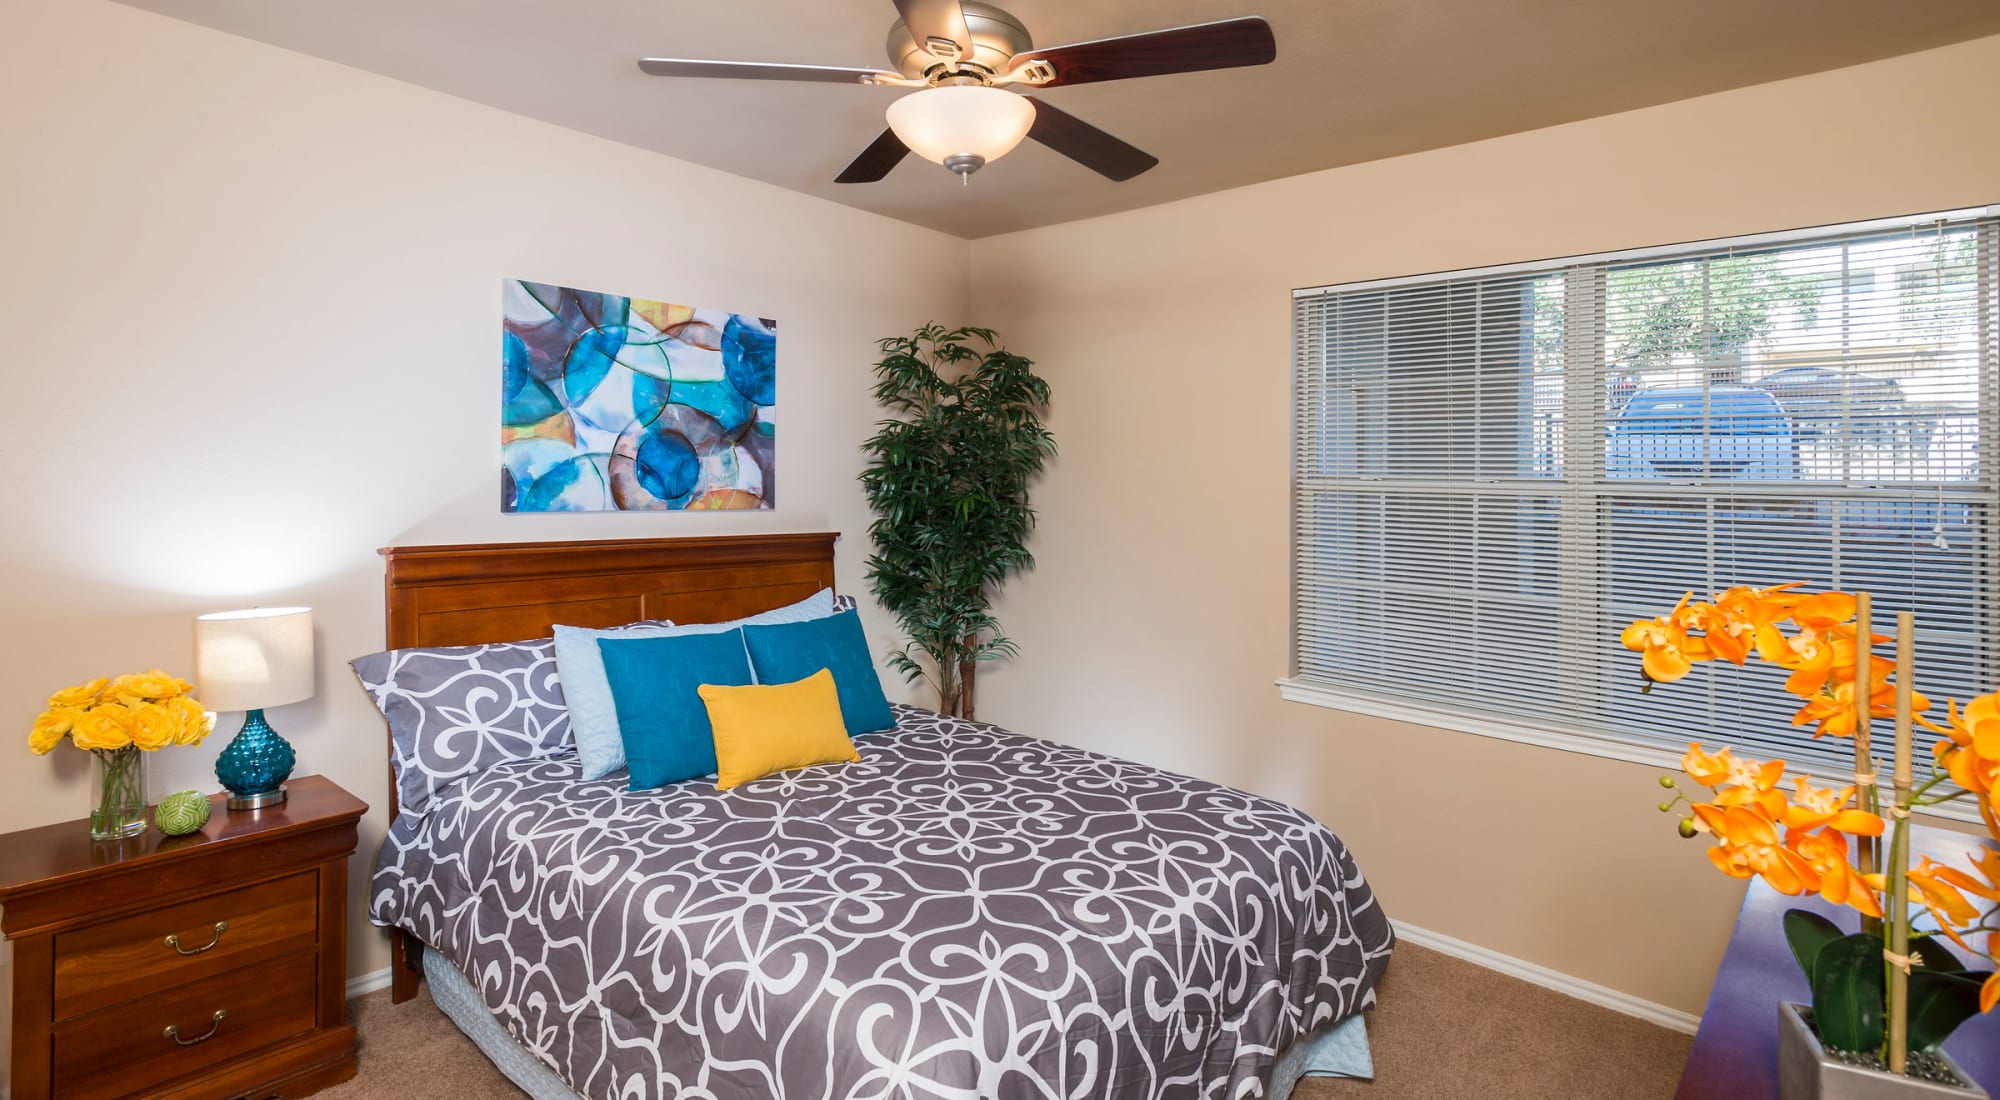 Bedroom with lighted ceiling fan at Mira Vista at La Cantera